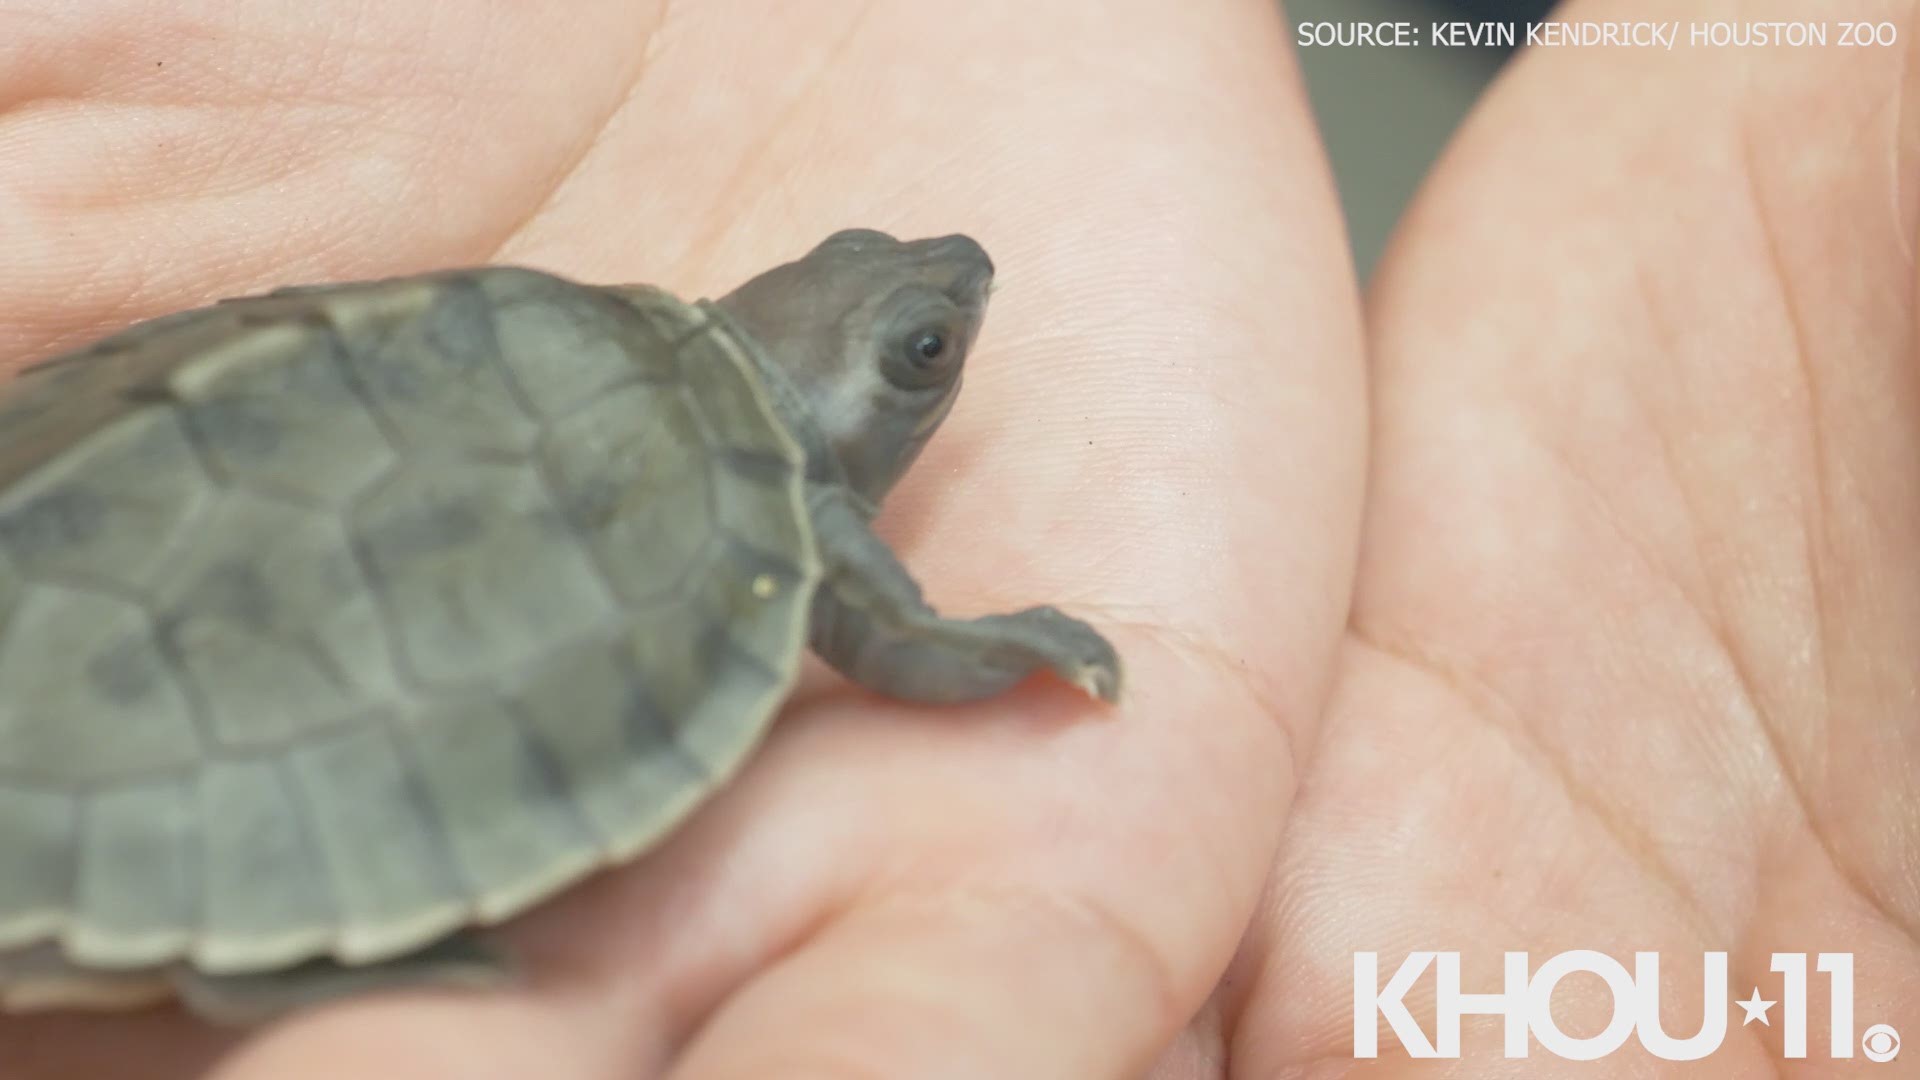 Houston Zoo is now home to four recently hatched painted terrapin turtles, one of the most endangered turtles in the world.